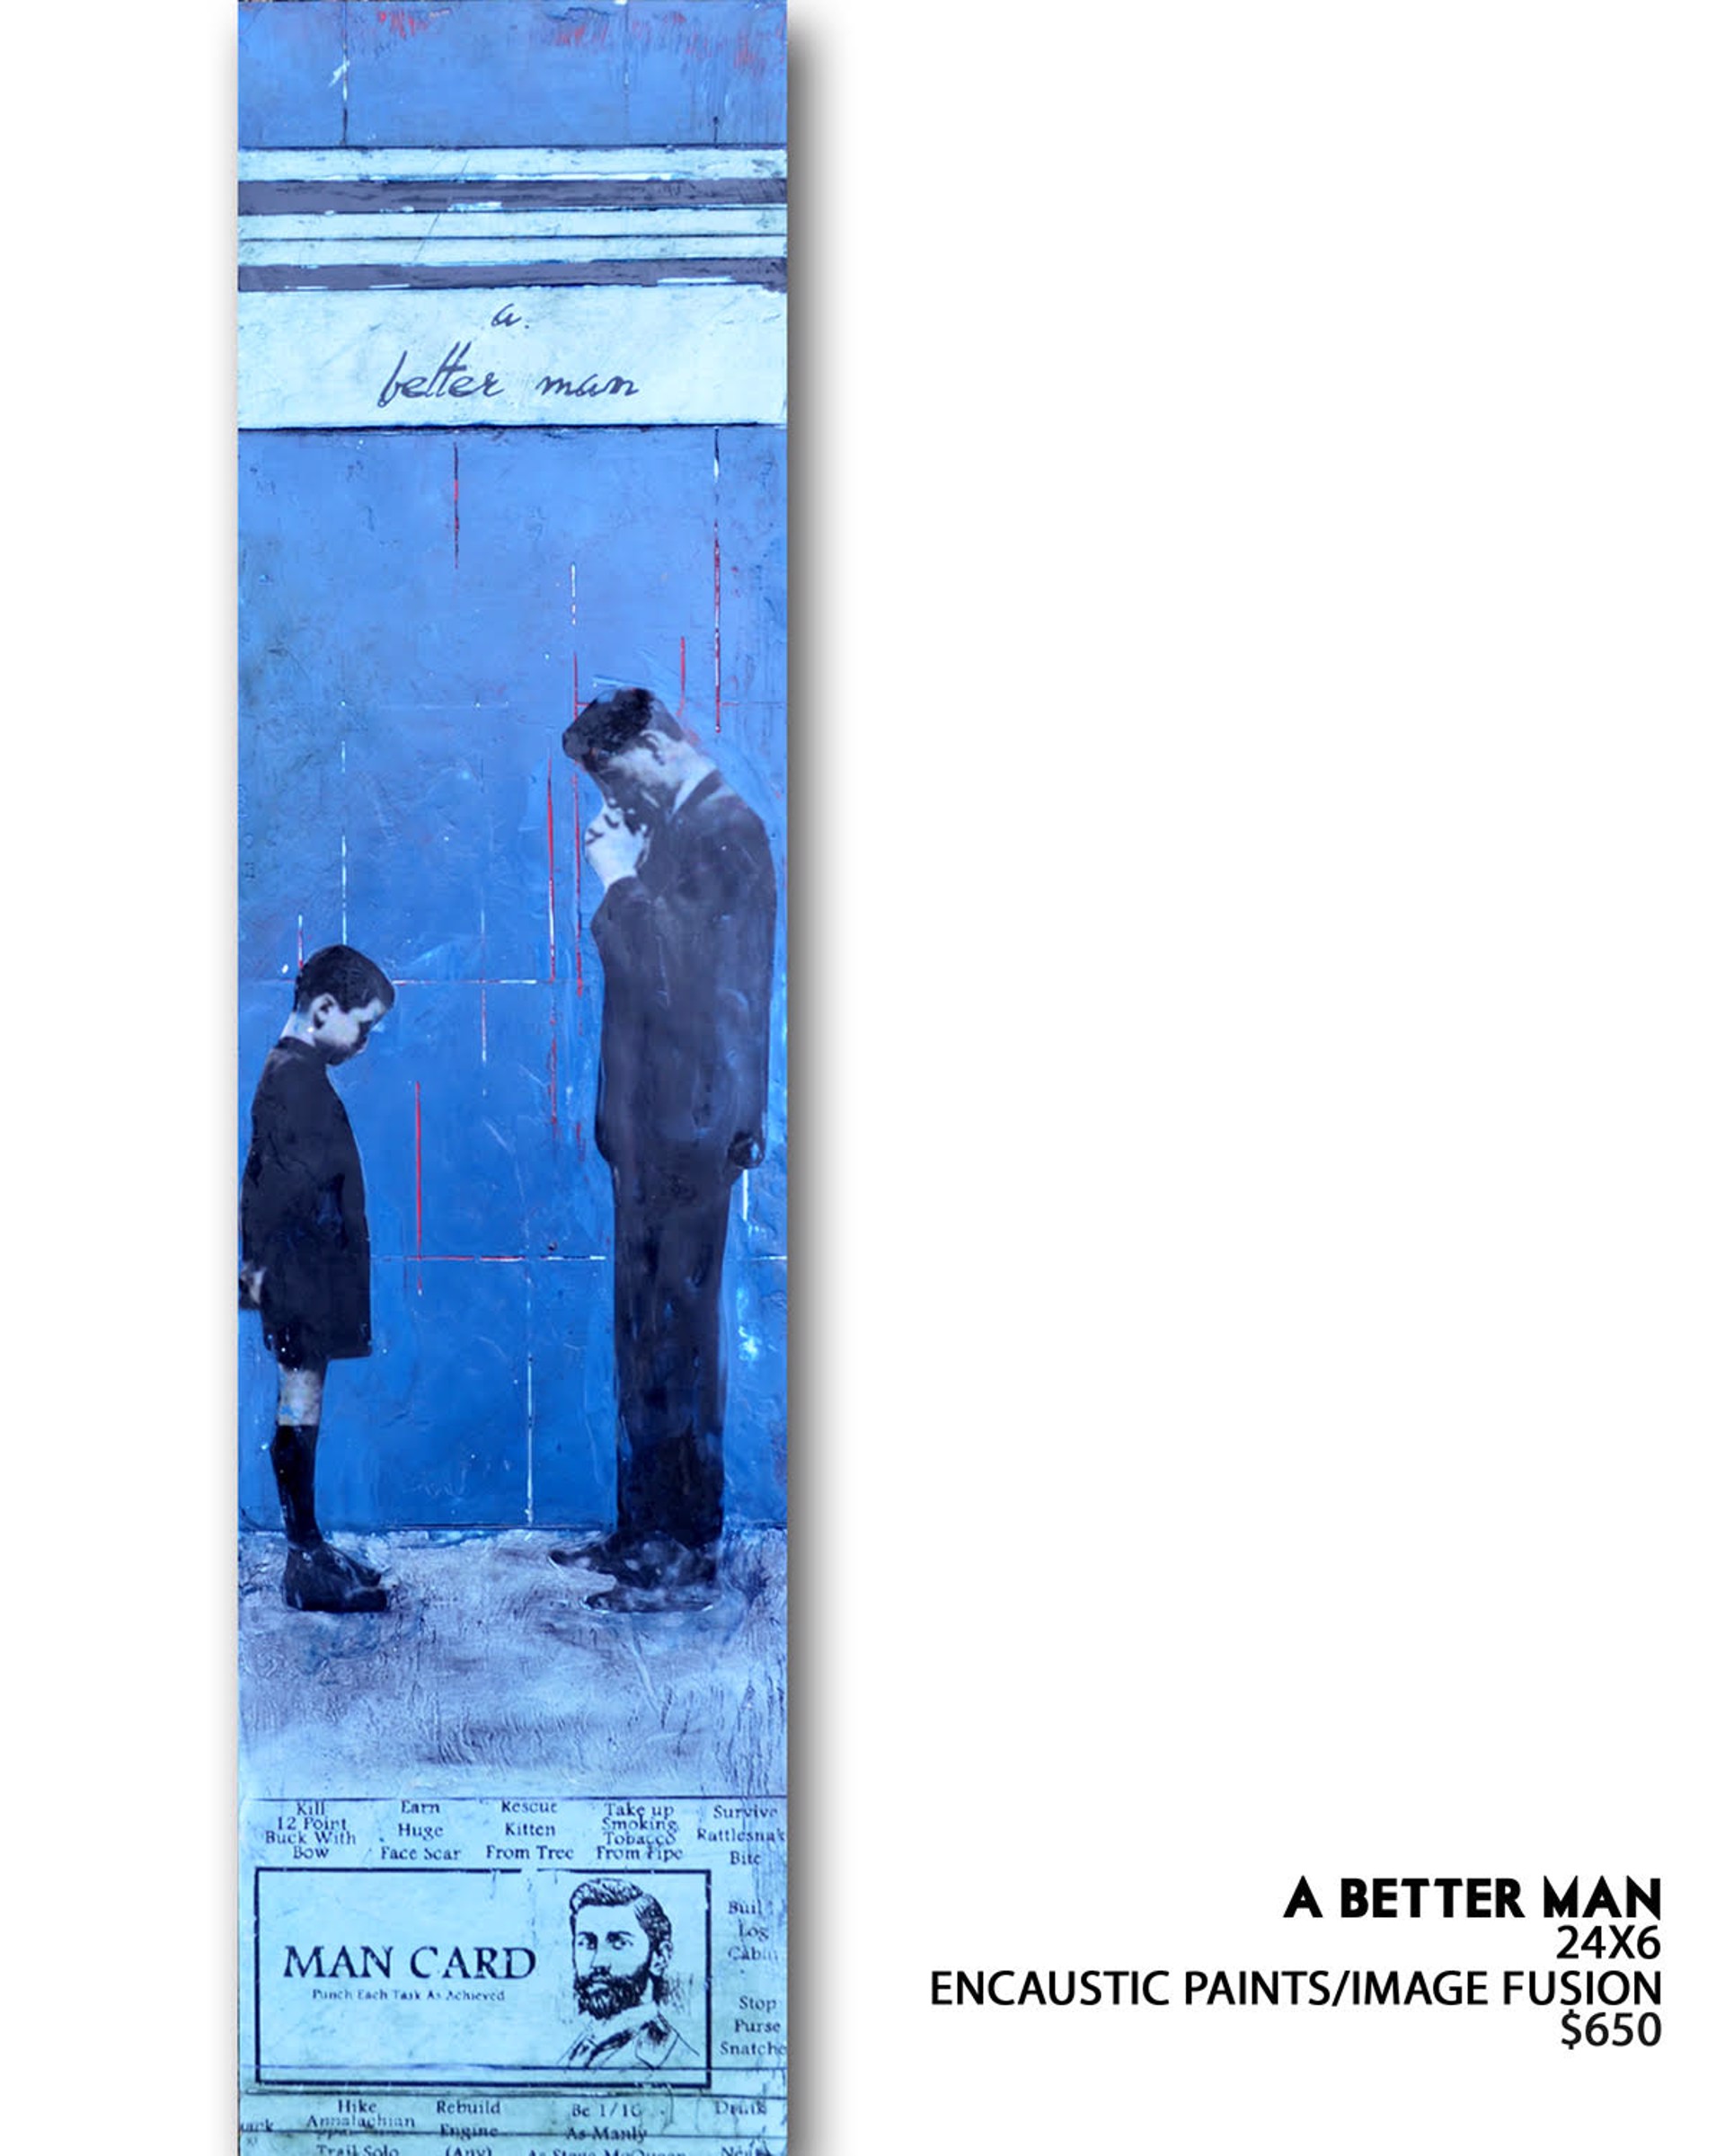 A Better Man by Ruth Crowe